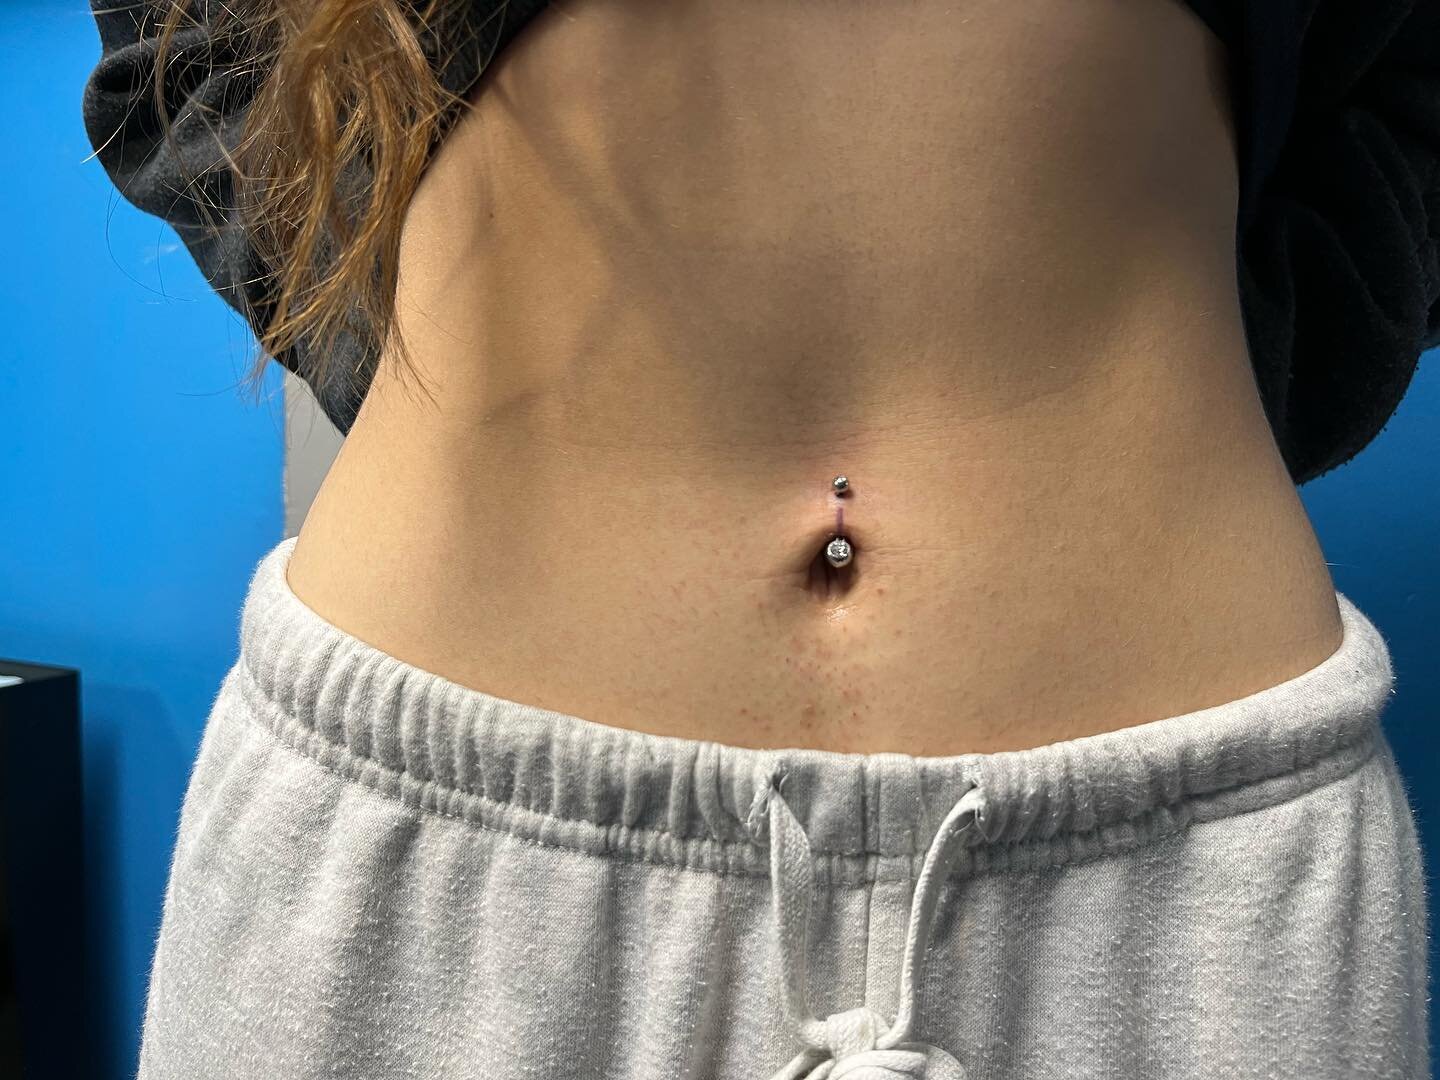 Naval, best time of year to get your belly pierced and show it off in the hot weather #bellypiercing #letsgetdecorated #pierclings  @lolastattoos